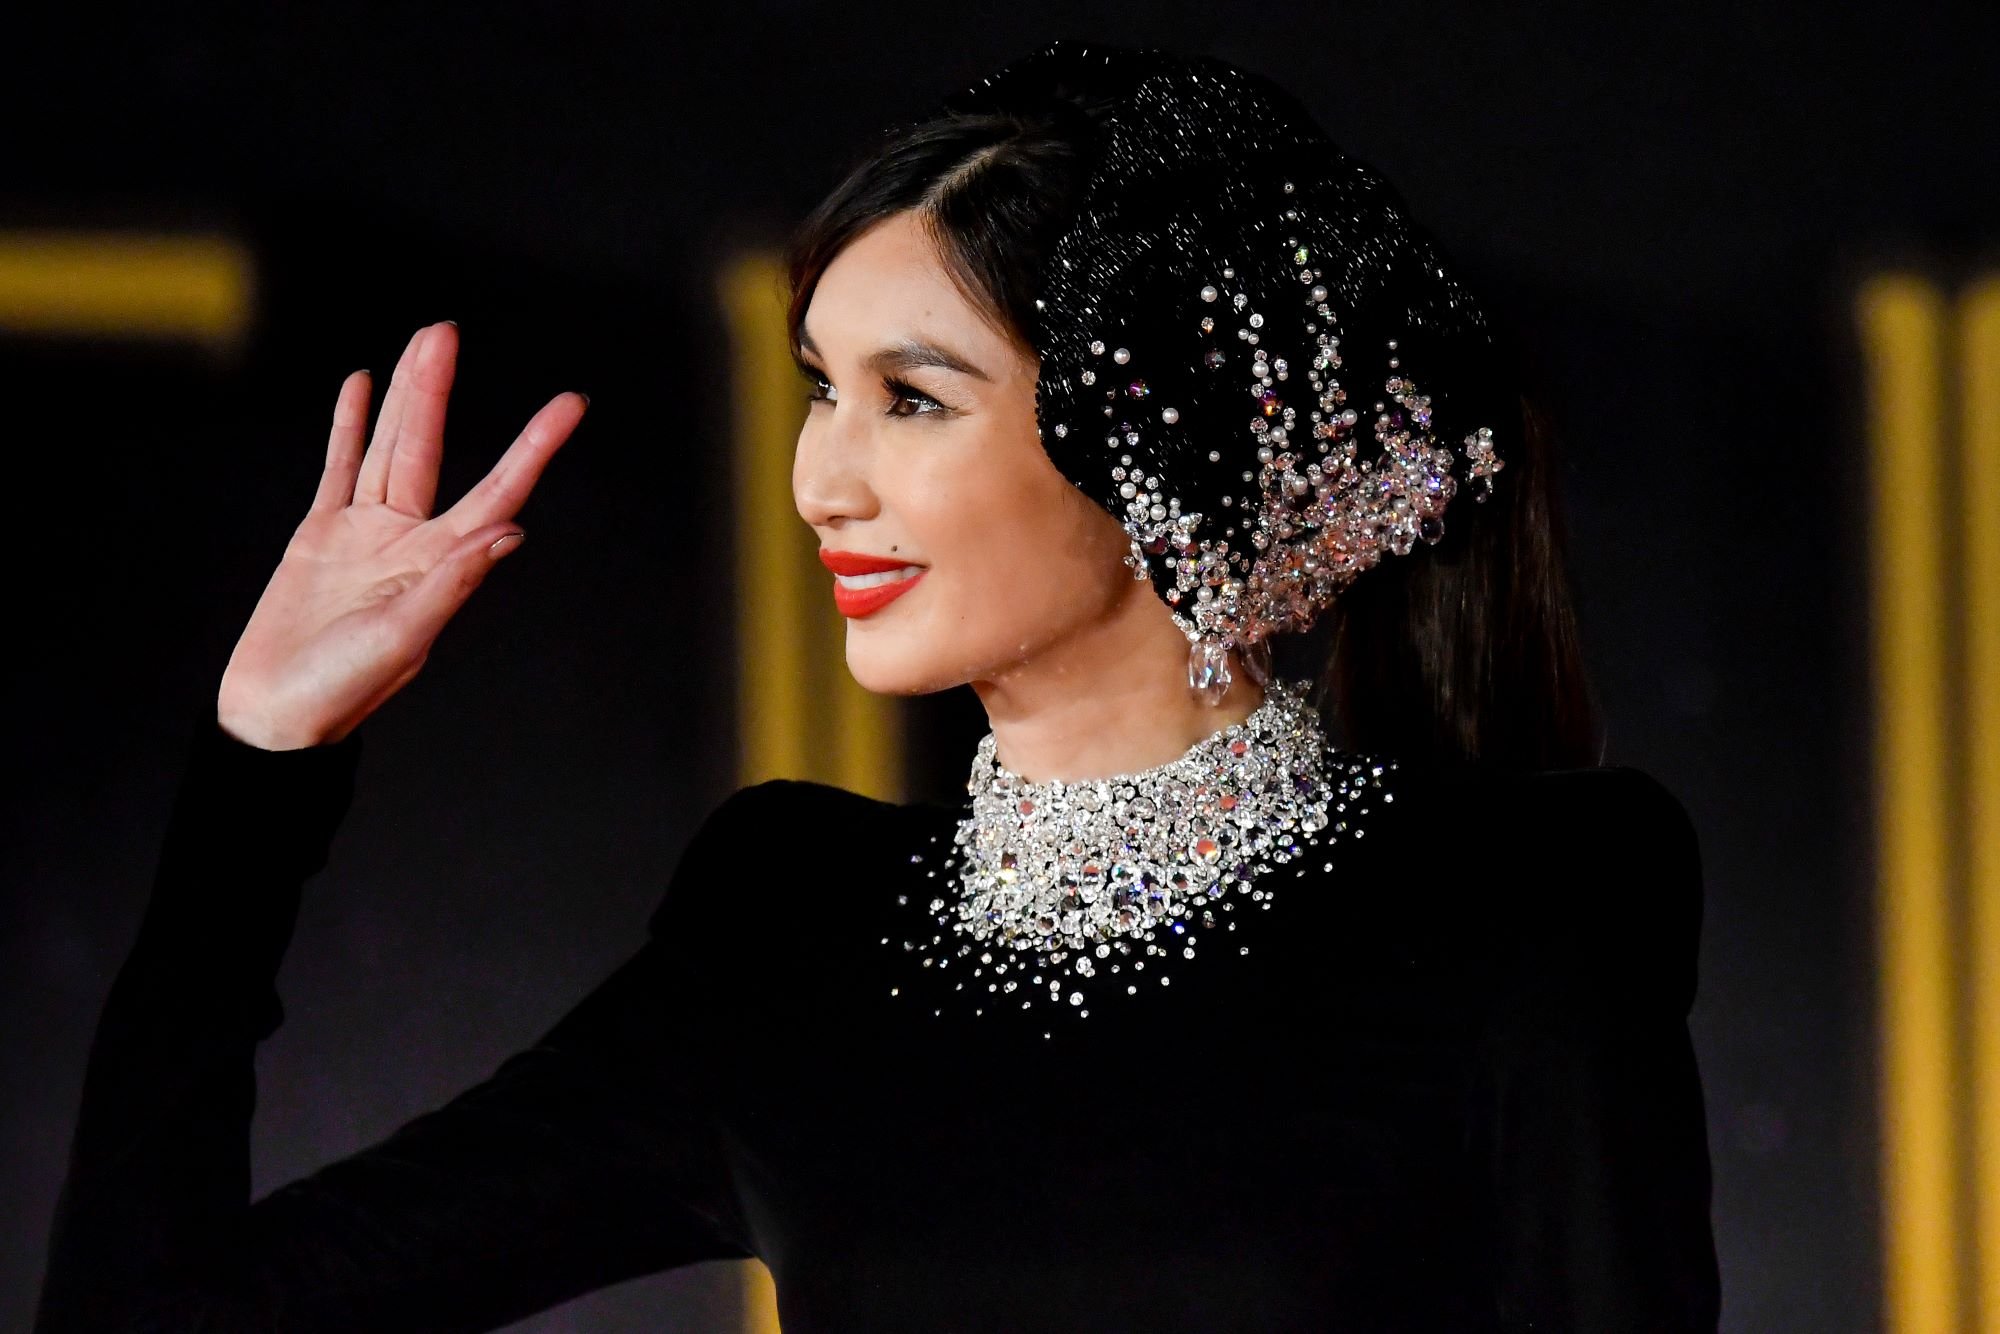 Marvel's 'Eternals' star Gemma Chan waves and wears a long-sleeved black dress with a diamond-studded collar and a black headpiece with numerous gems on it.